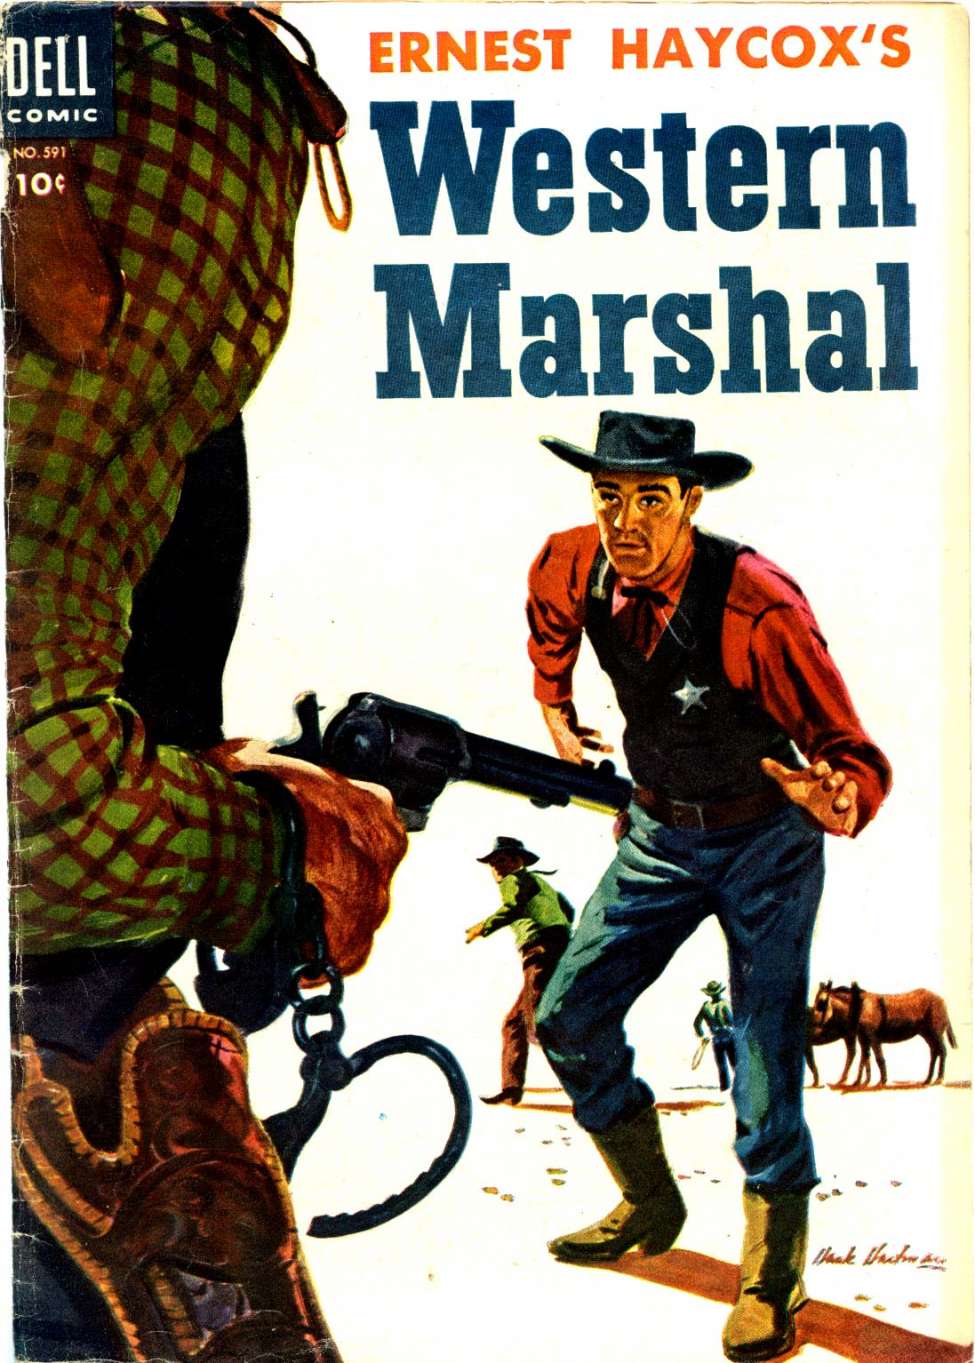 Comic Book Cover For 0591 - Ernest Haycox's Western Marshall